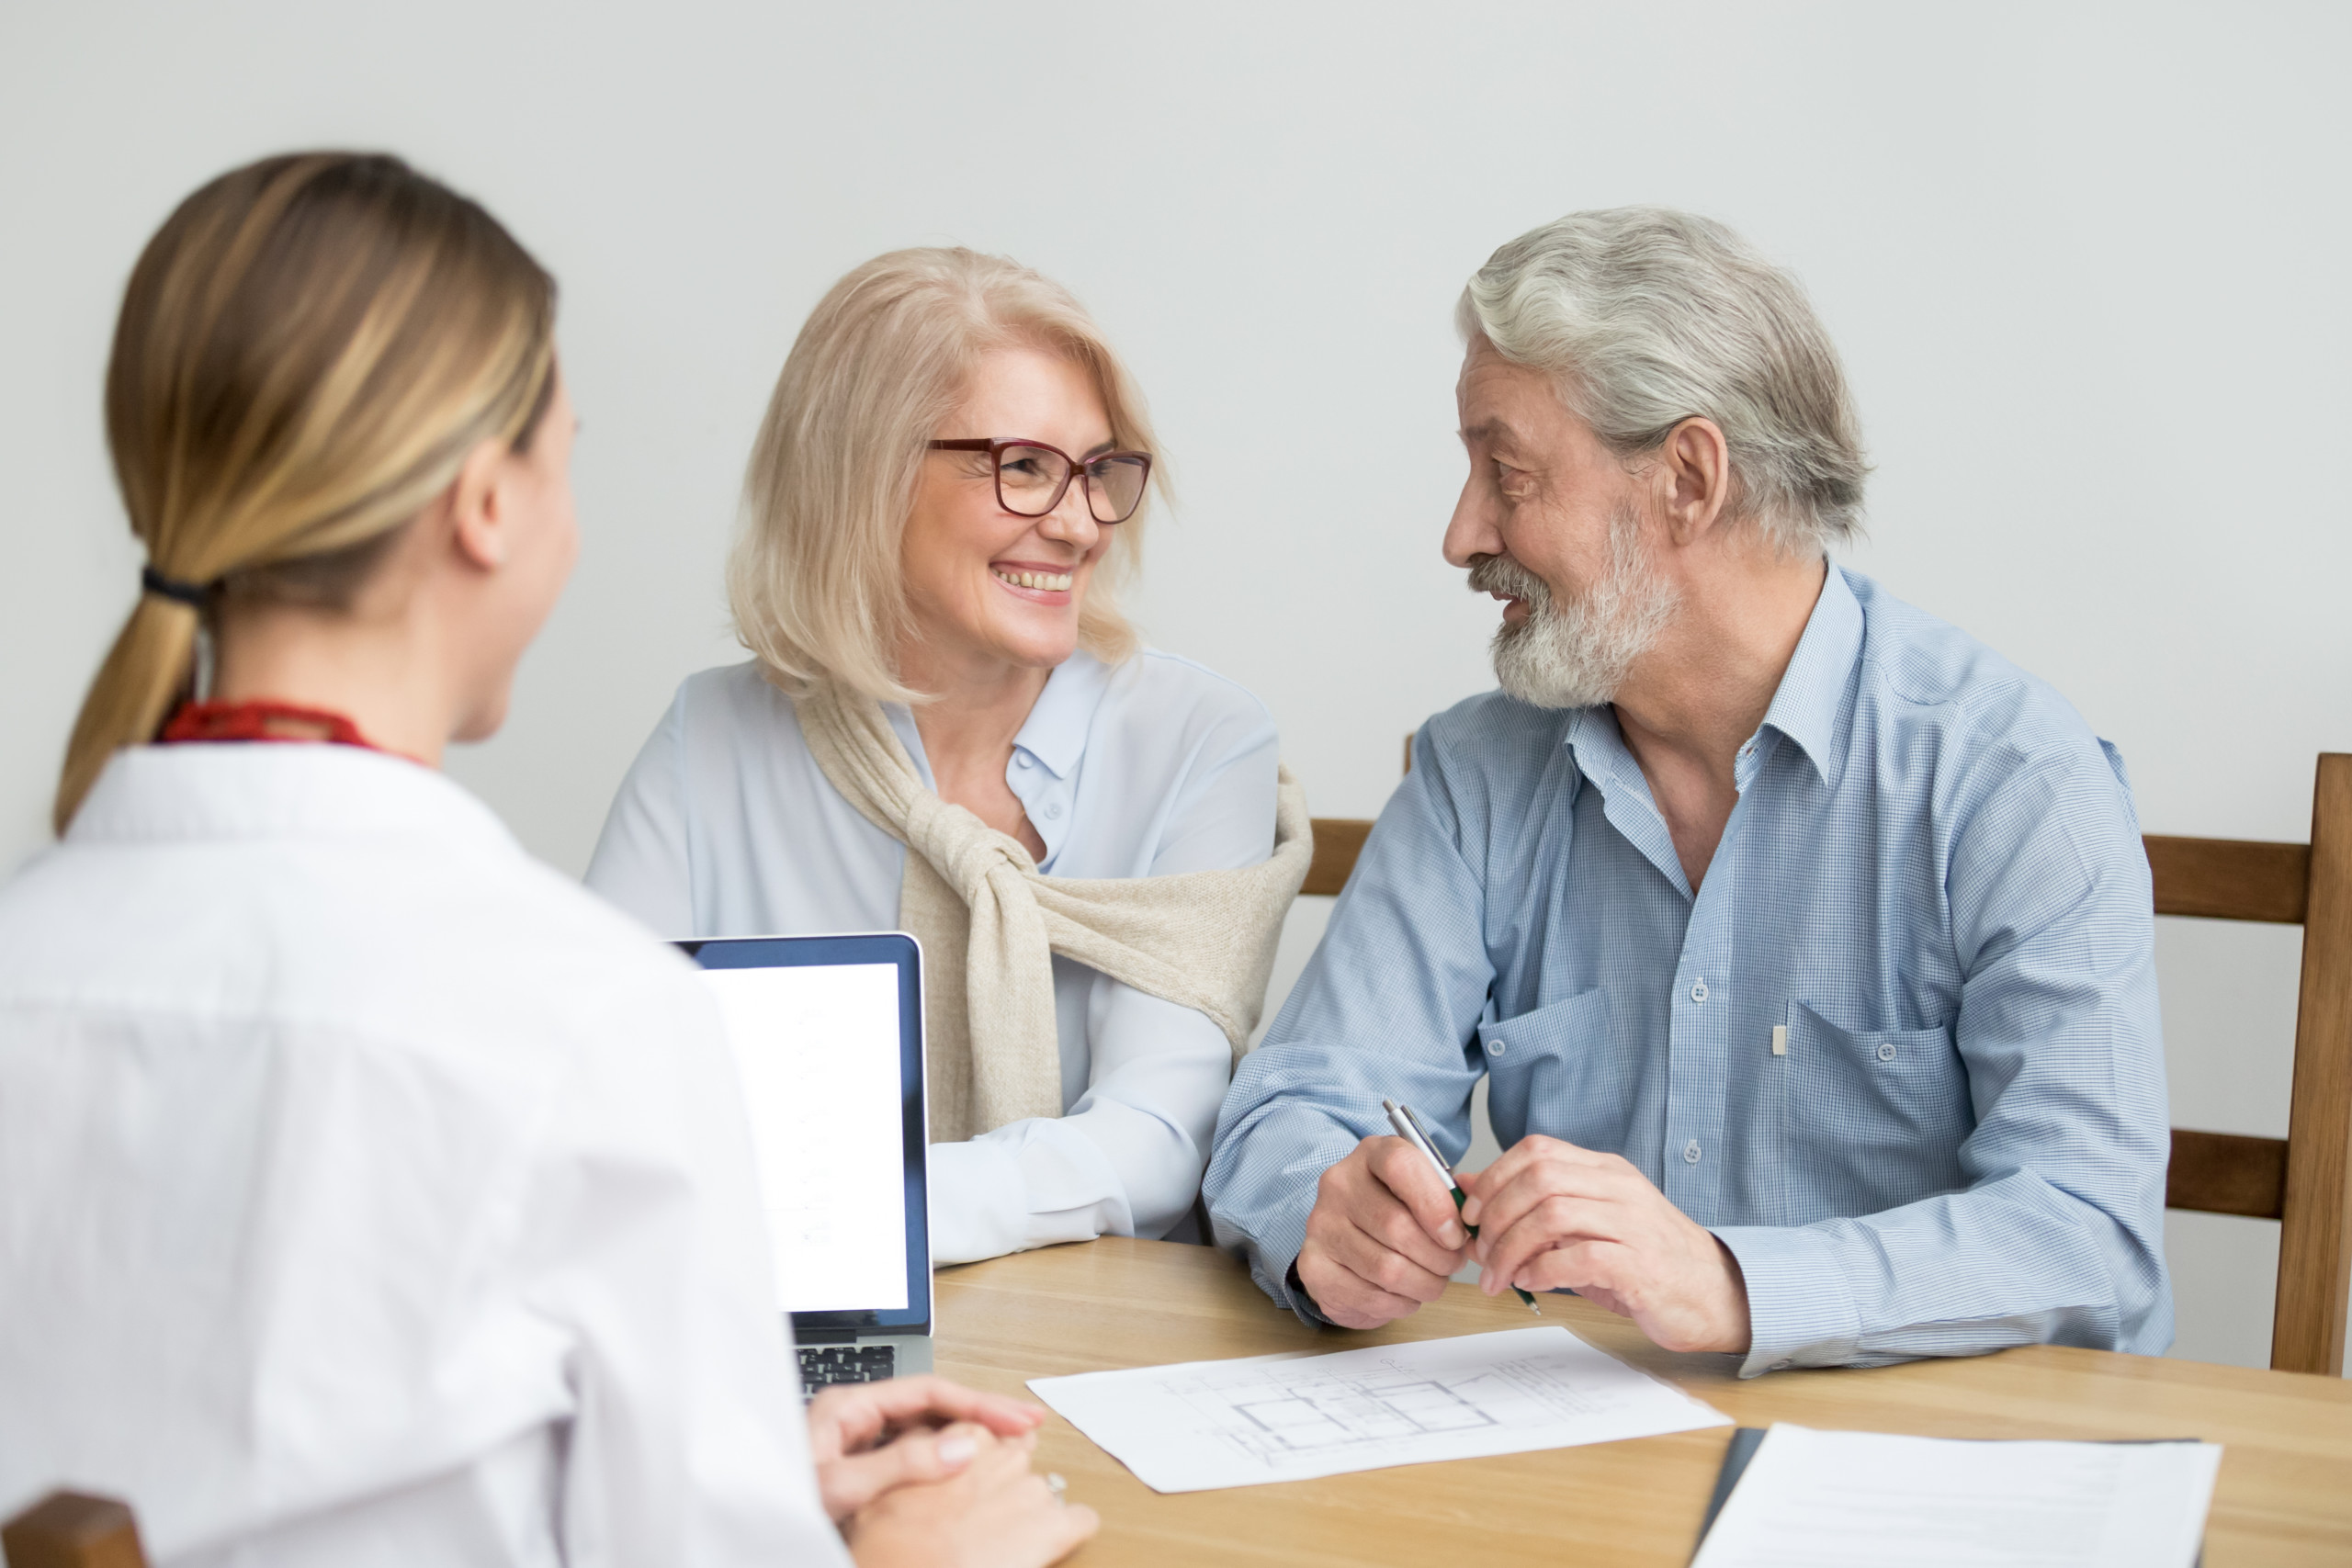 Happy senior couple deciding discussing new house purchase at meeting with agent, smiling older aged family consulting about buying home, taking mortgage loan, making investment or real estate deal